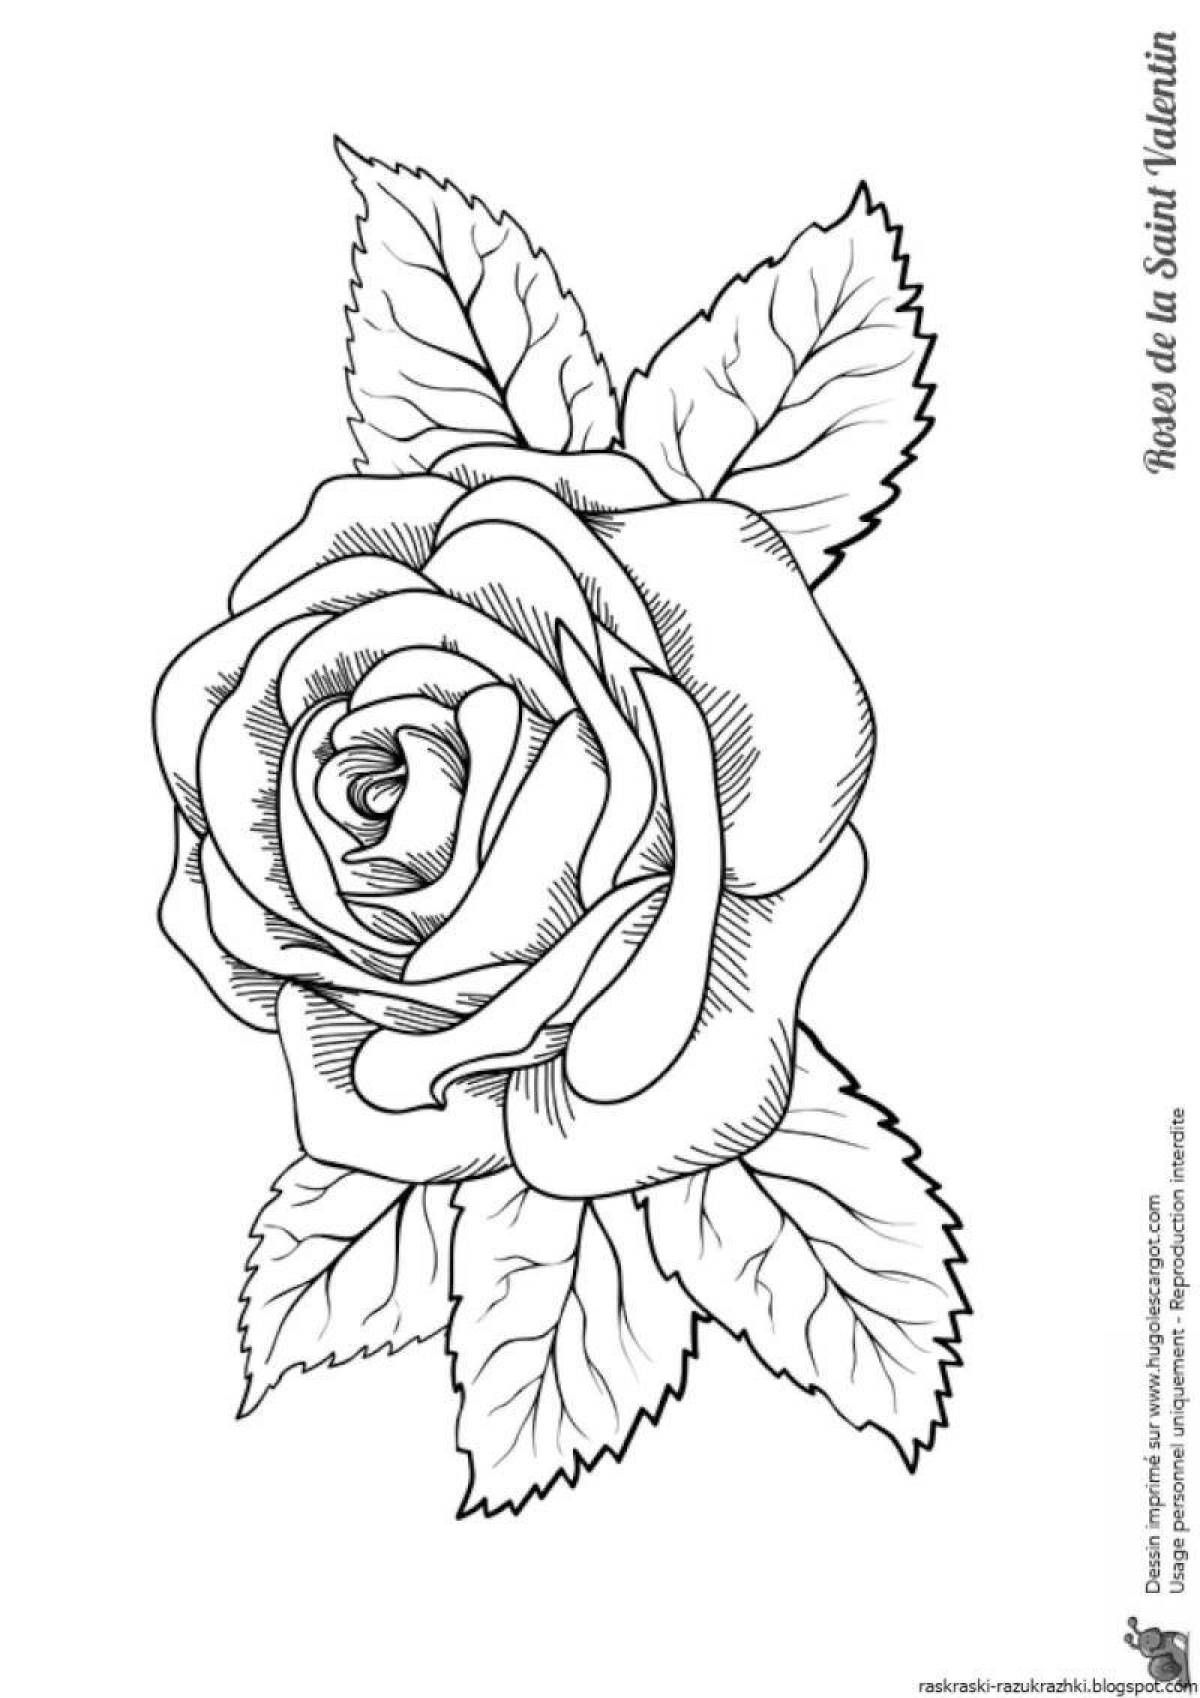 Coloring page dazzling rose